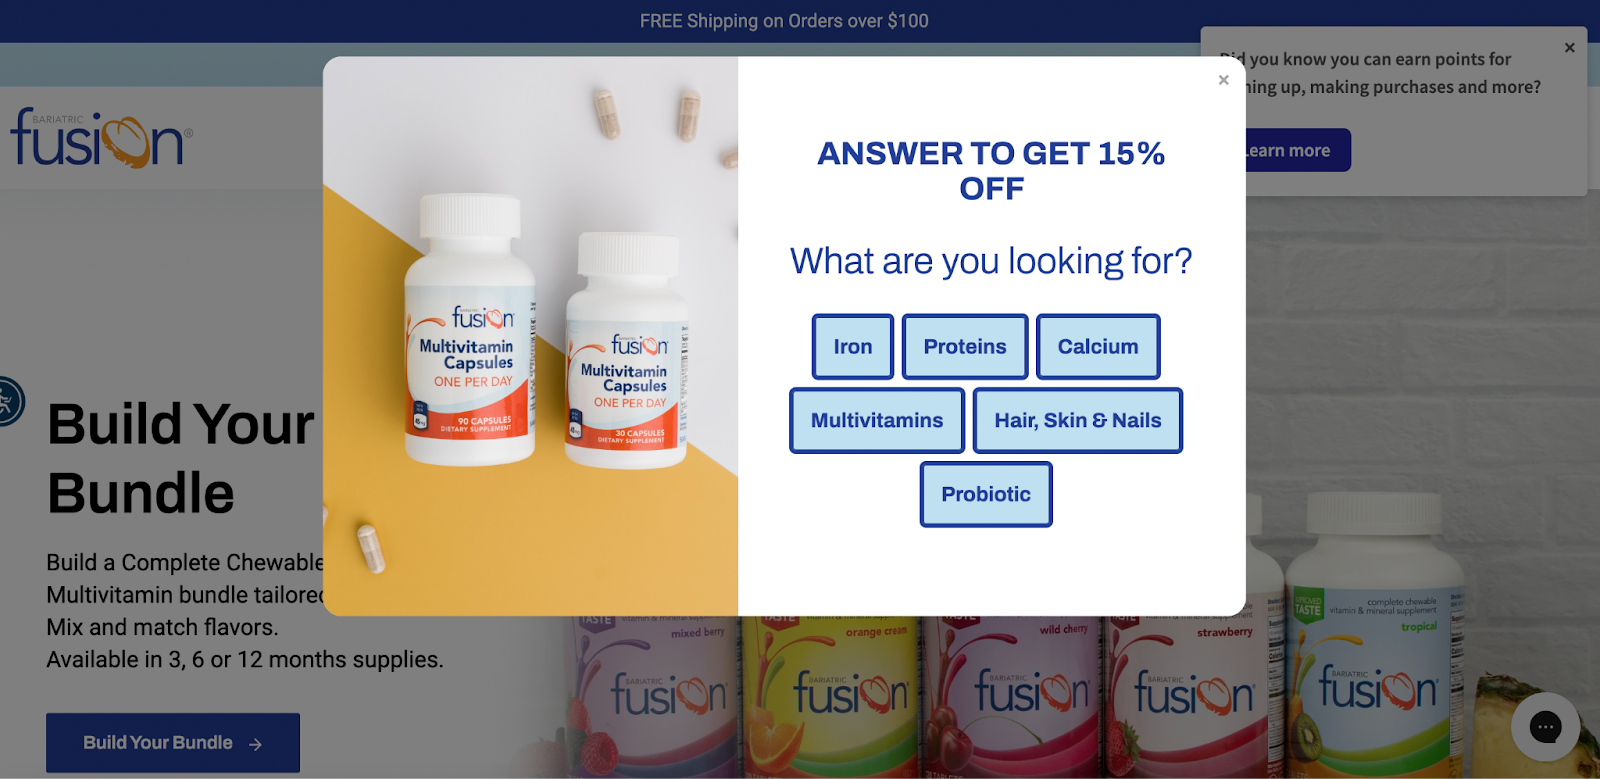 Pop-ups on the Bariatric Fusion website.